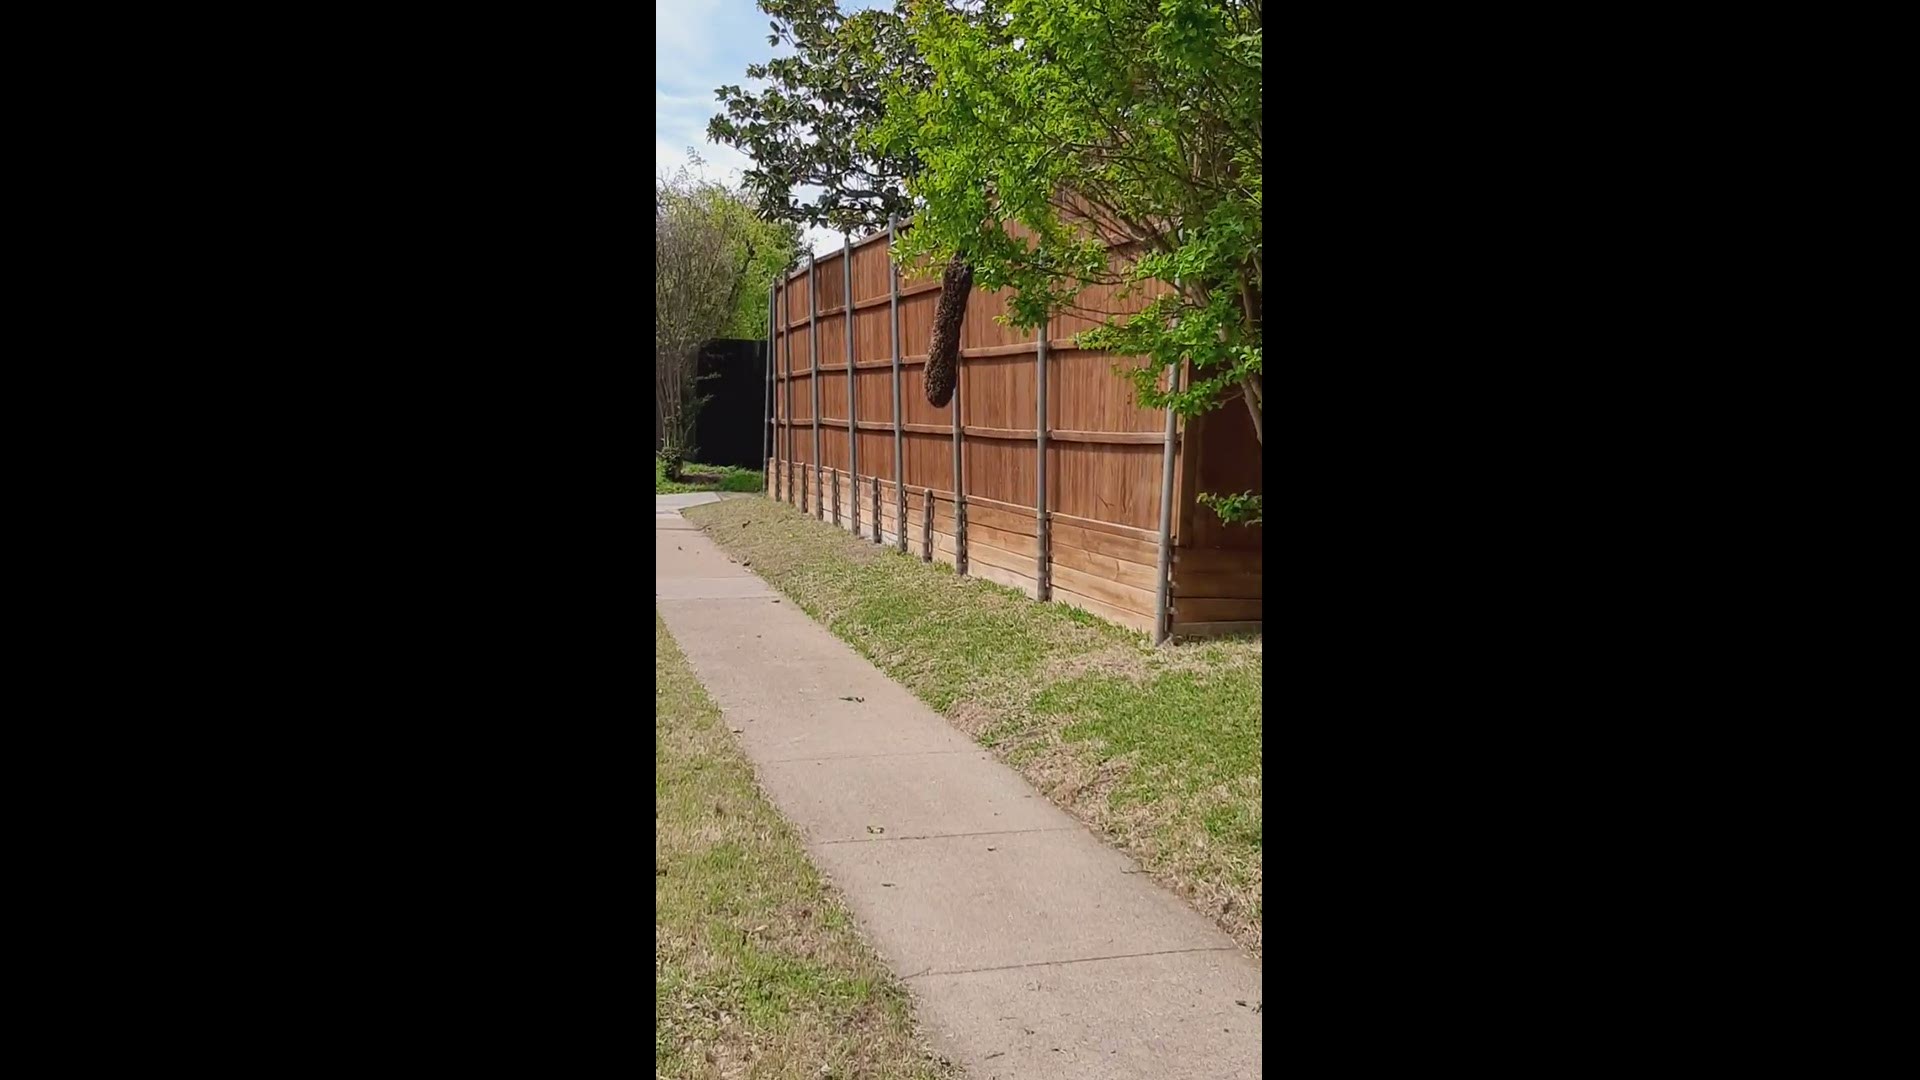 The Plano Parks & Recreation Department shared this video to Facebook that shows about 10,000 bees in the swarm.